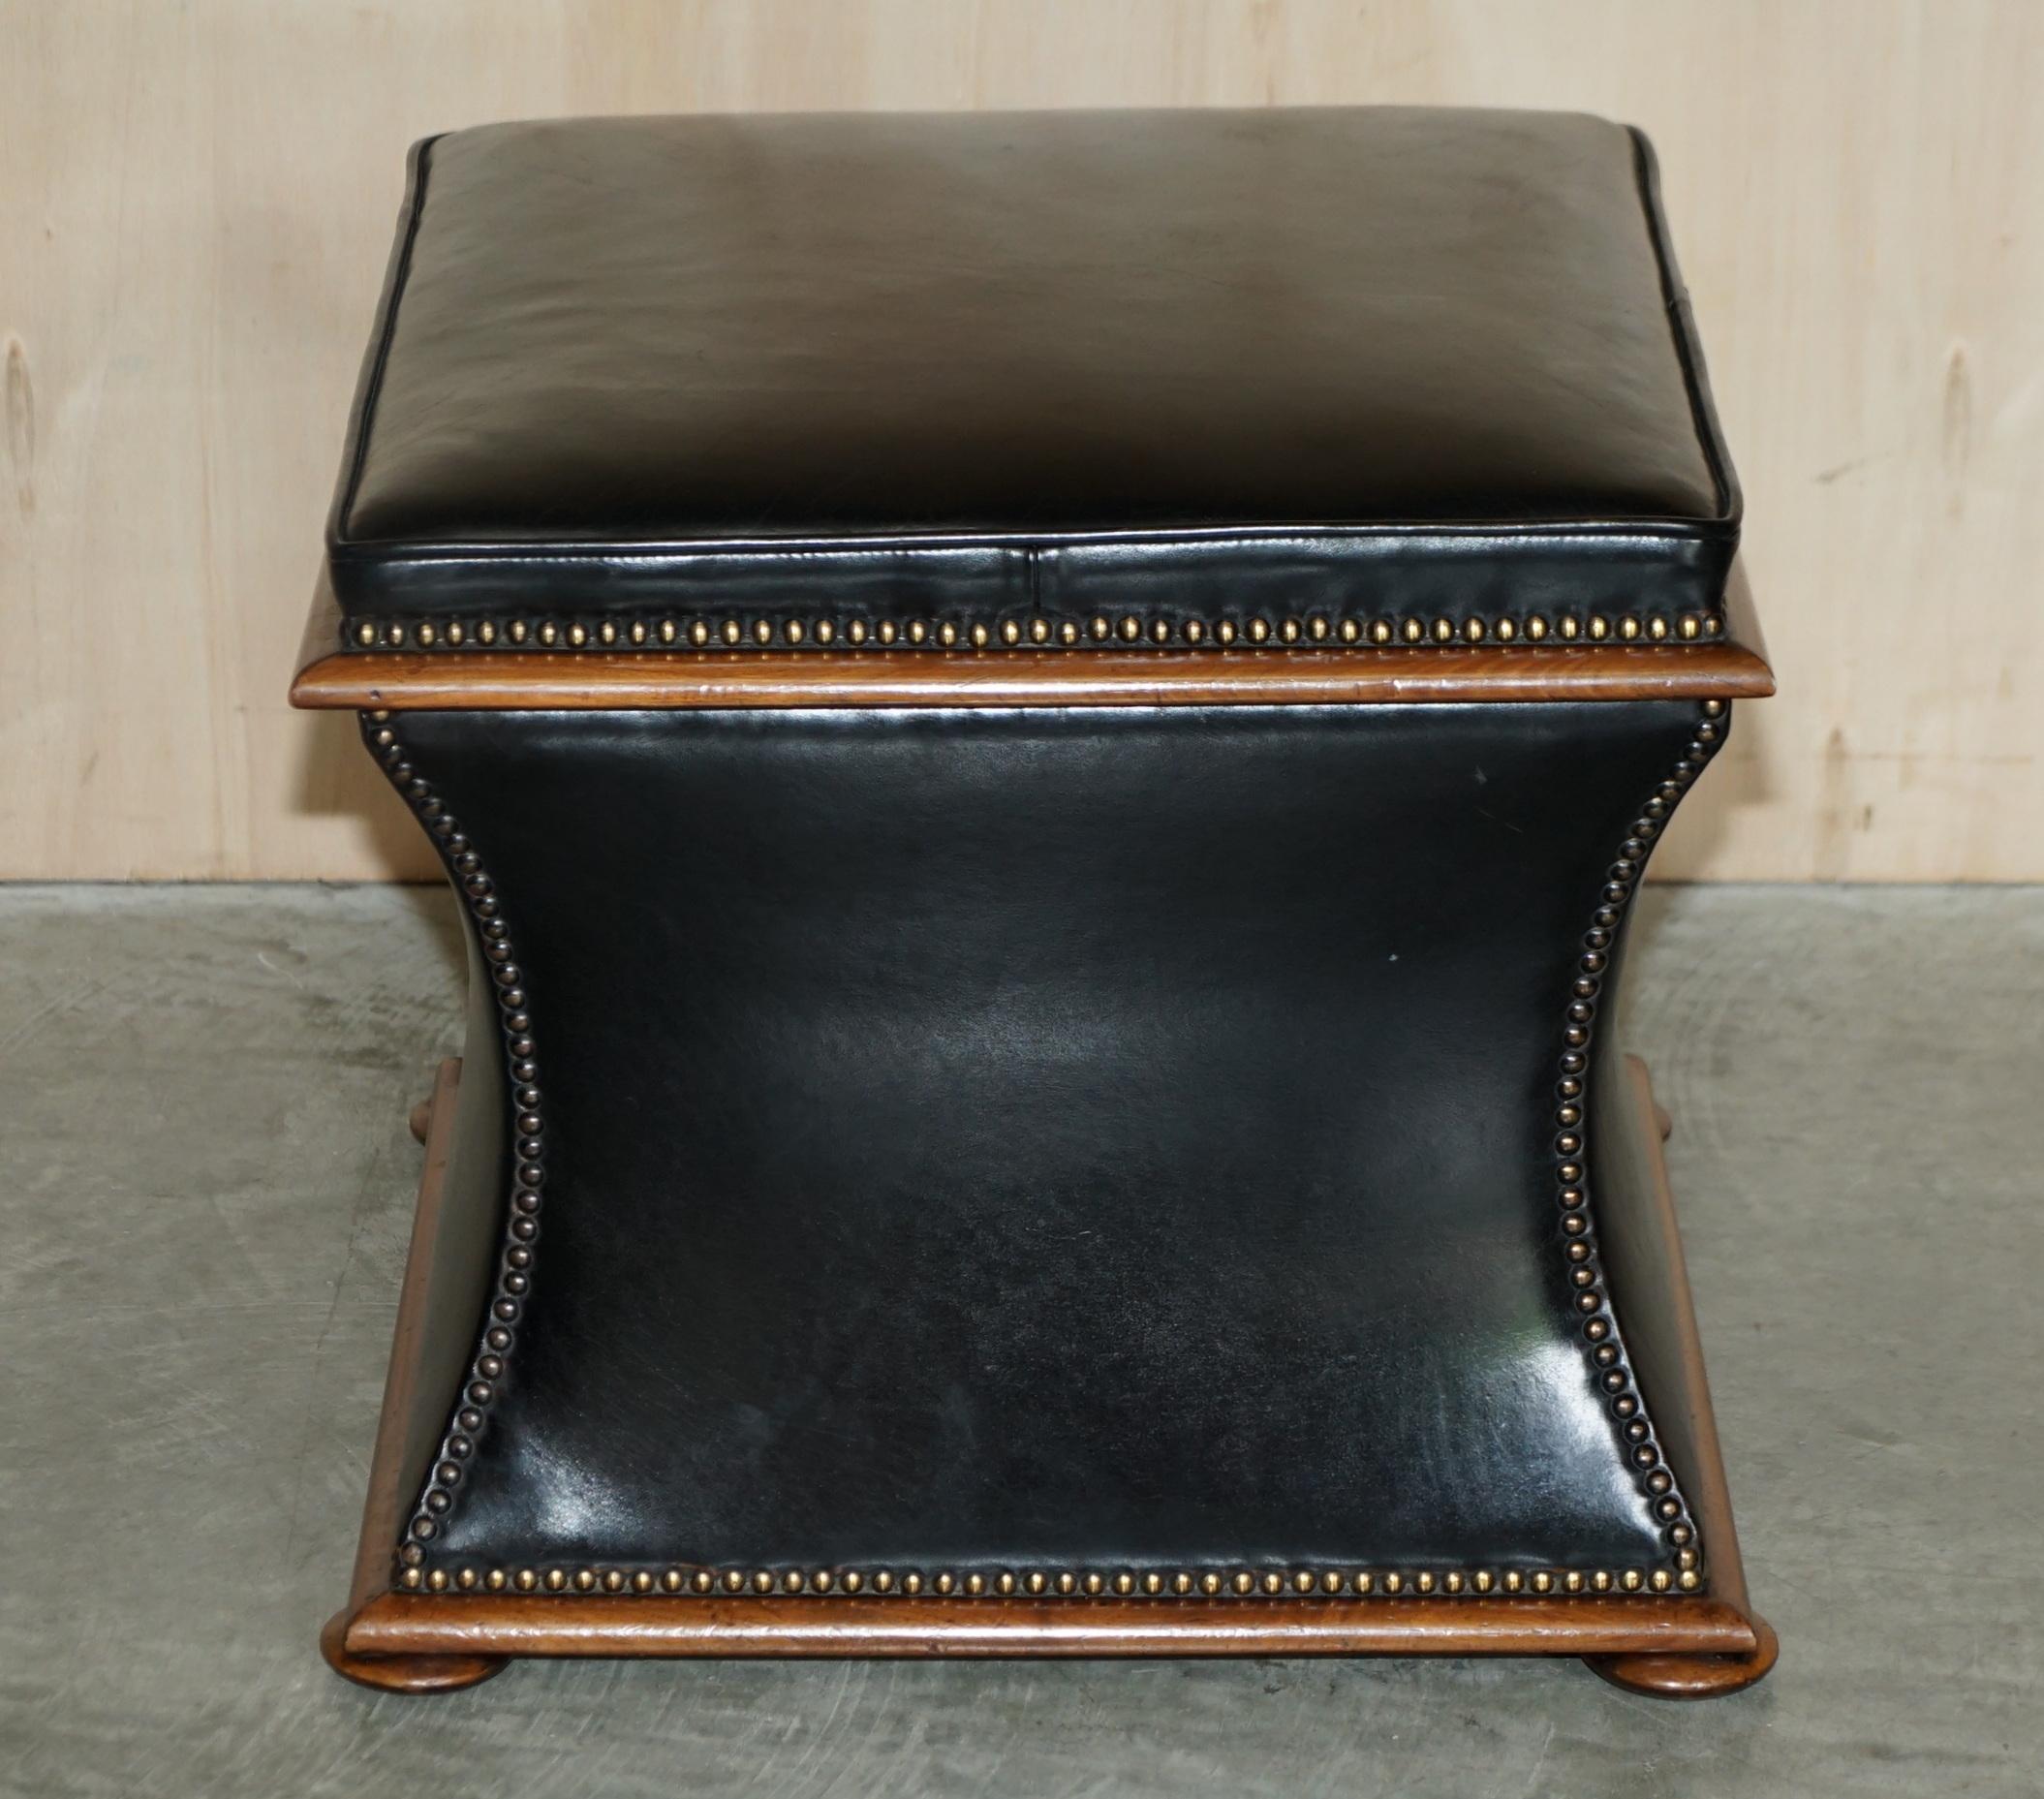 Royal House Antiques

Royal House Antiques is delighted to offer for sale this lovely original Victorian black leather and mahogany ottoman stool

Please note the delivery fee listed is just a guide, it covers within the M25 only for the UK and